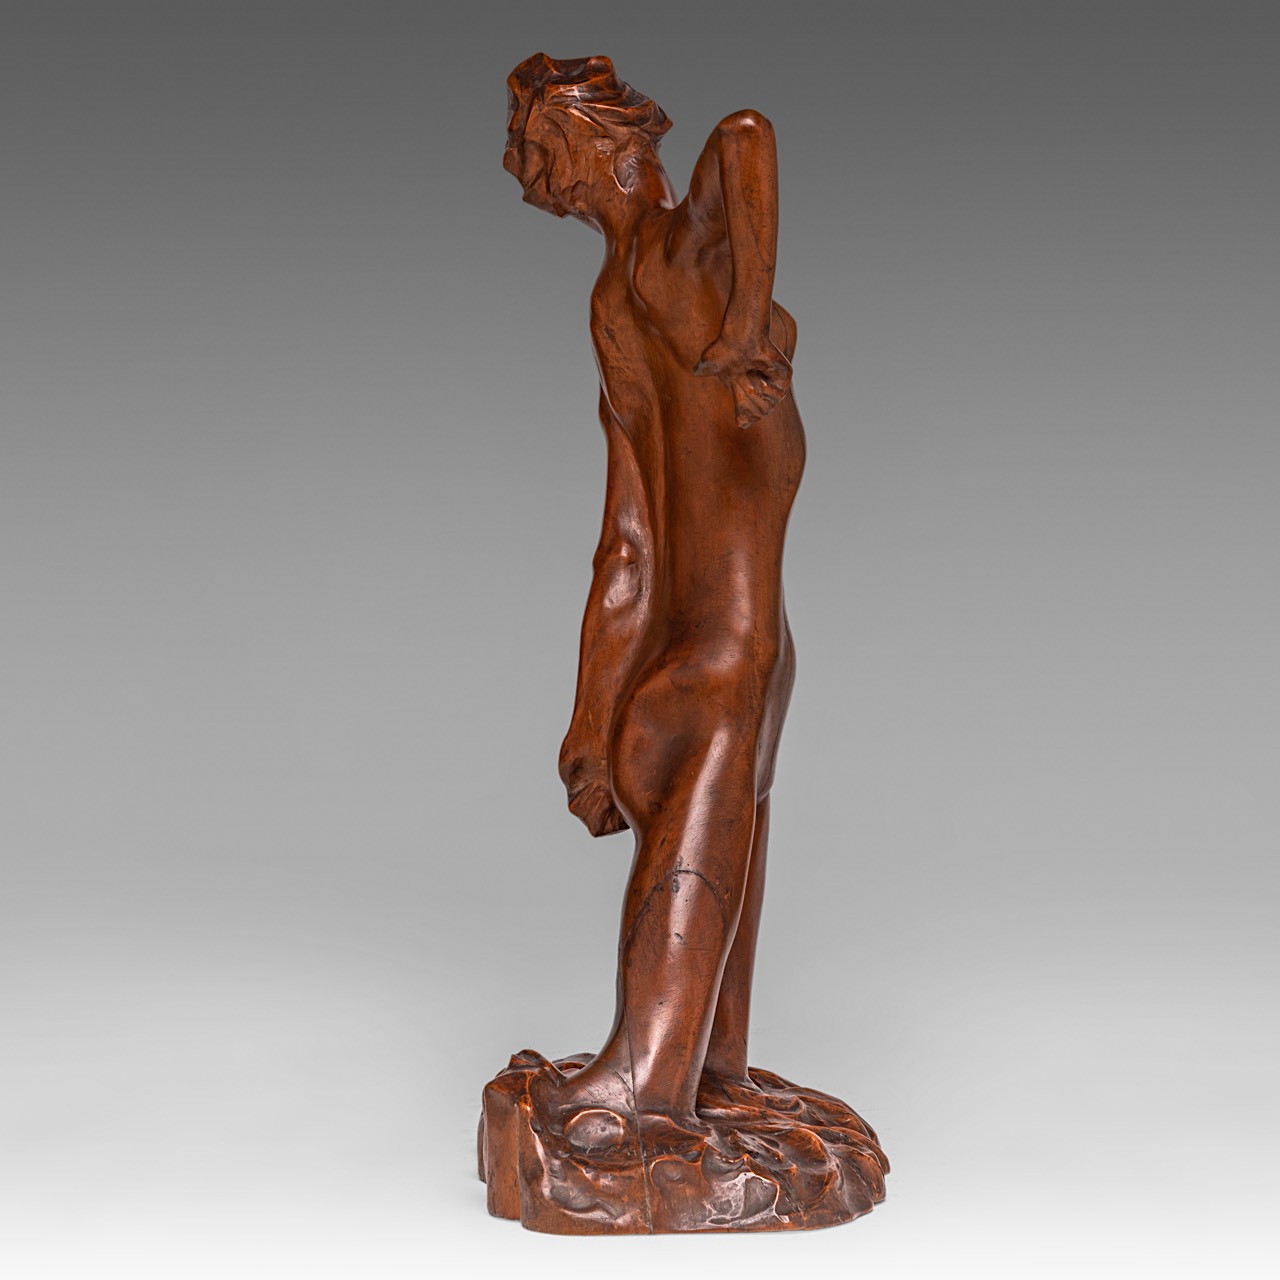 George Minne (1866-1941), 'Baigneuse I', carved wood, H 40 cm - Image 6 of 10